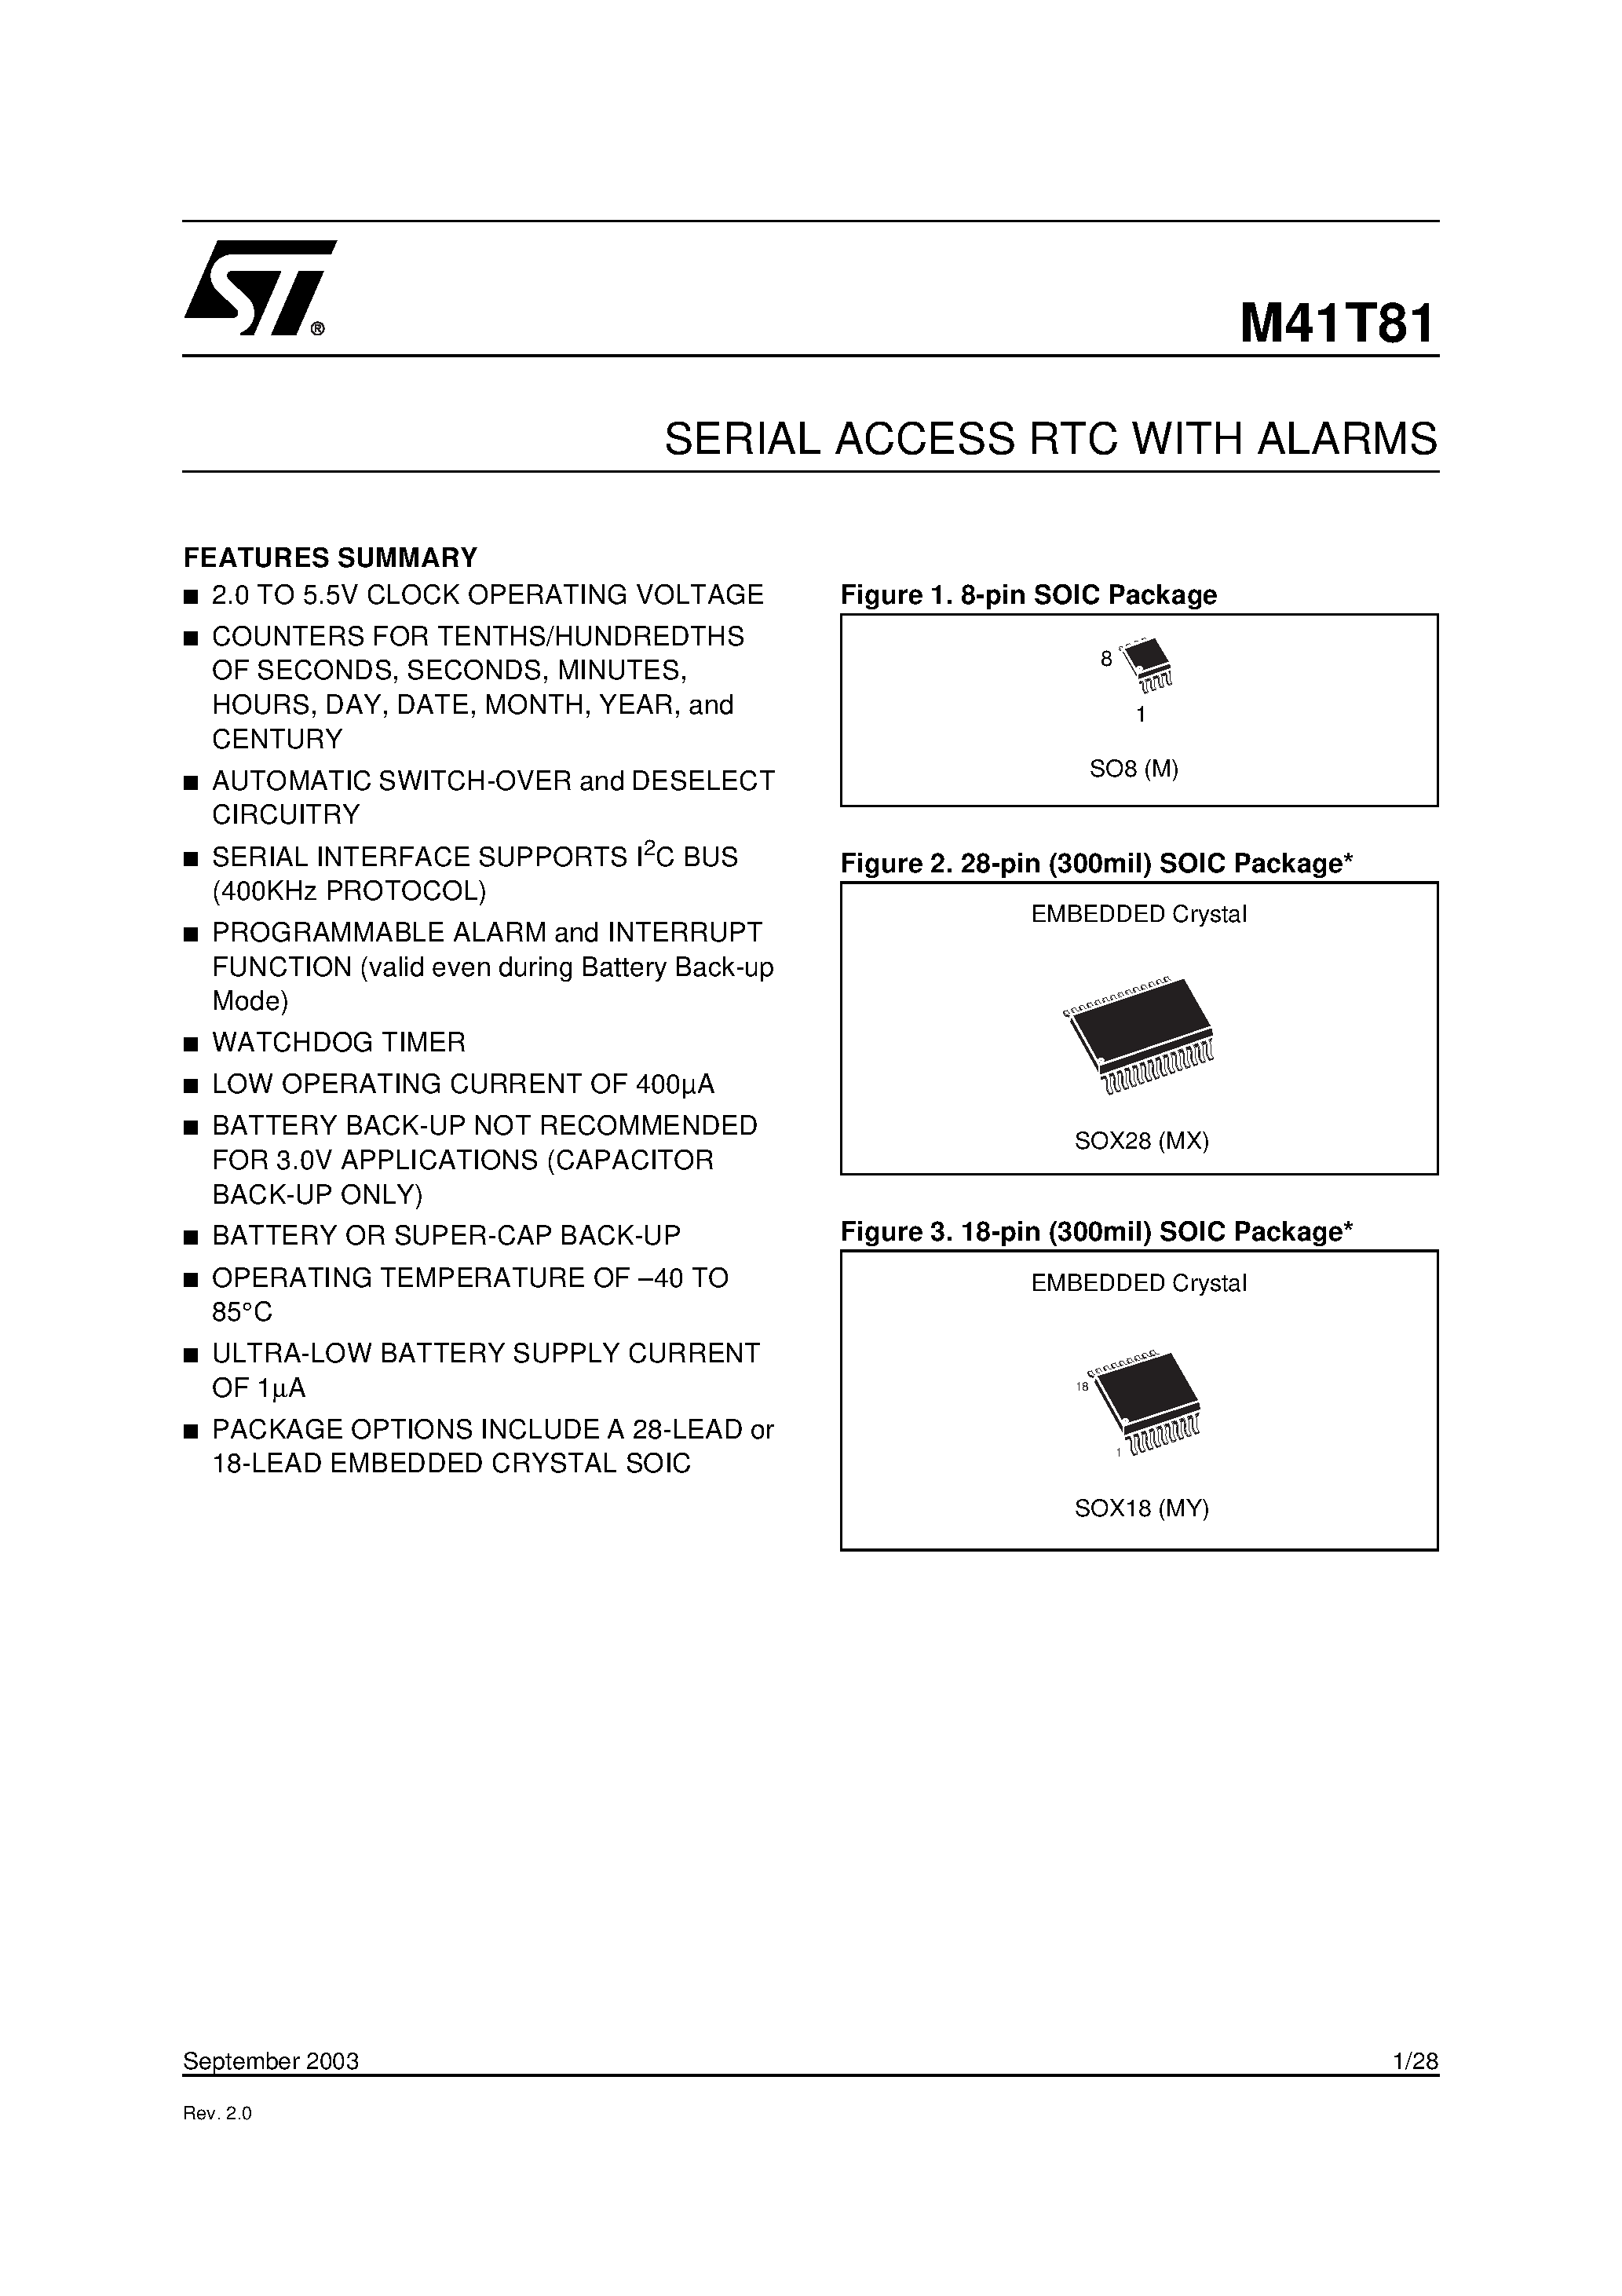 Datasheet M41T81 - SERIAL ACCESS RTC WITH ALARMS page 1